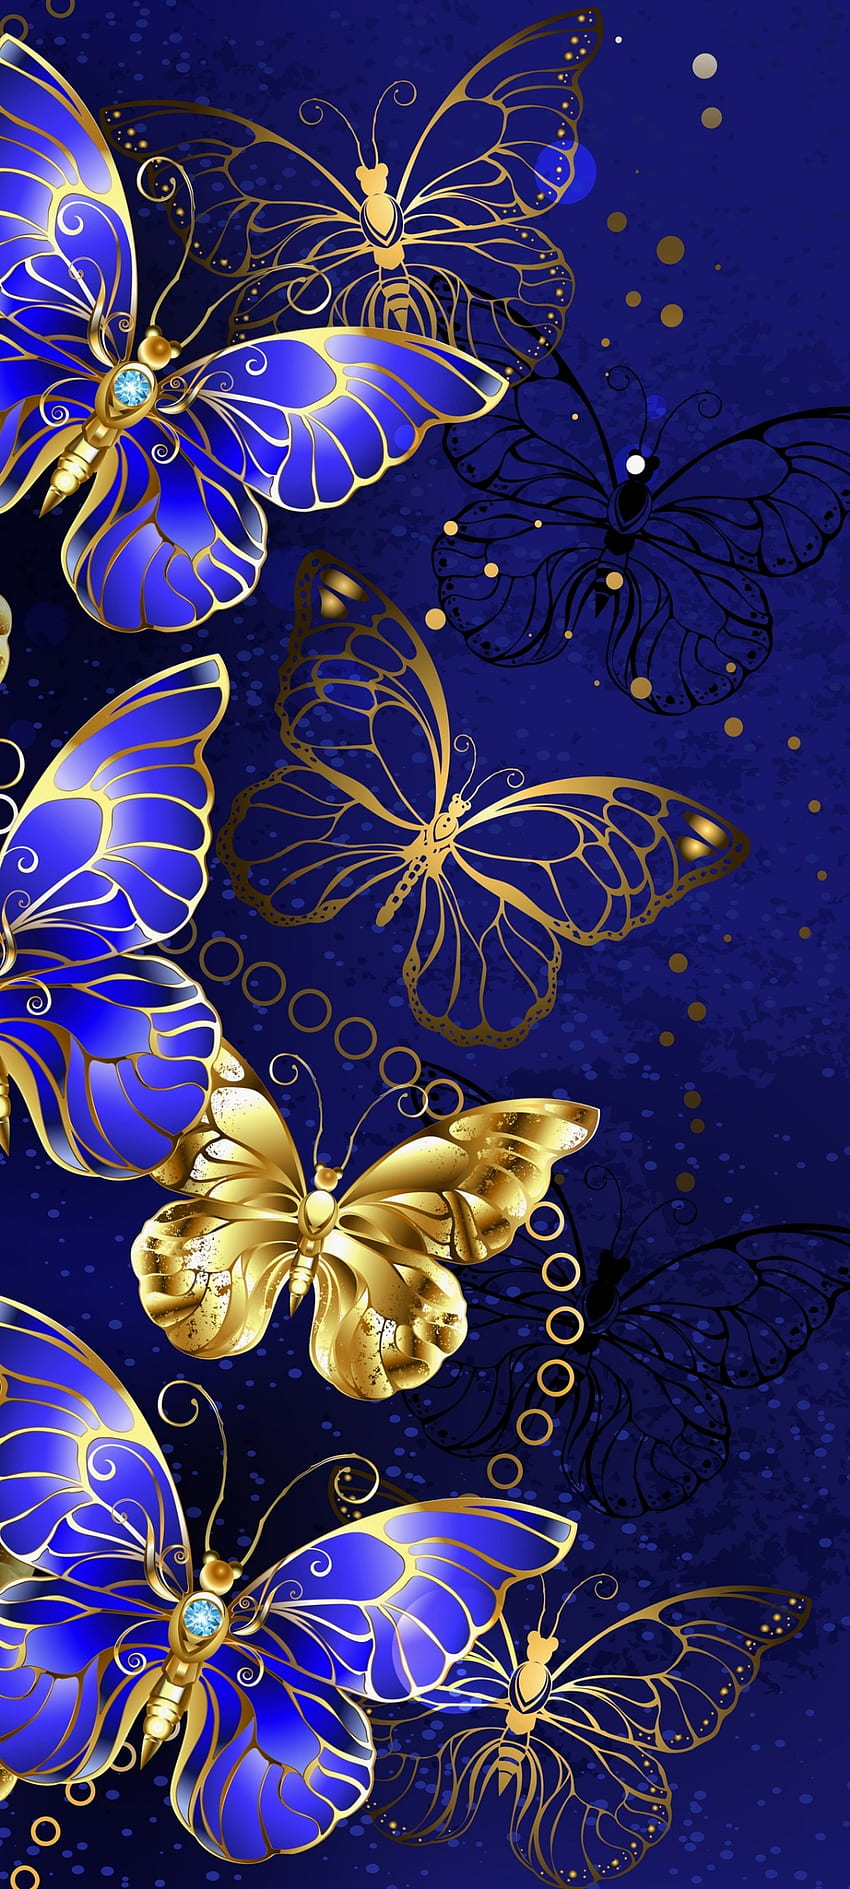 Full 4K Collection of Amazing Butterfly Wallpaper Images - Top 999 ...